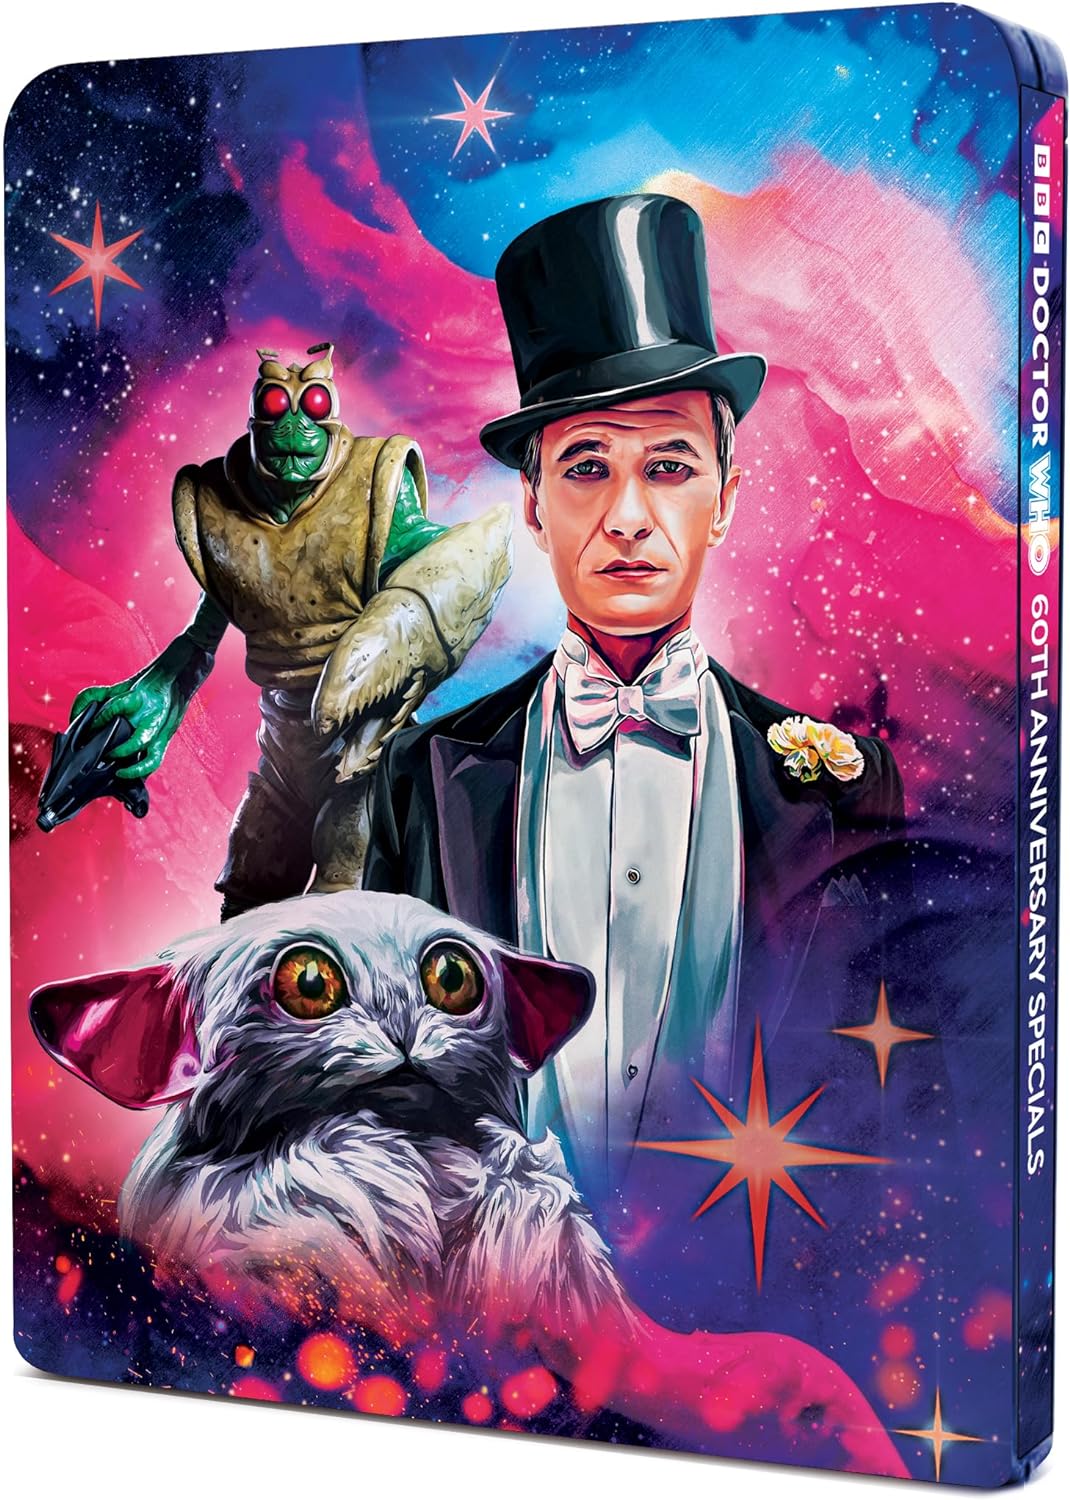 Doctor Who 60th Anniversary specials available to pre-order on Steelbook,  DVD and Blu-ray